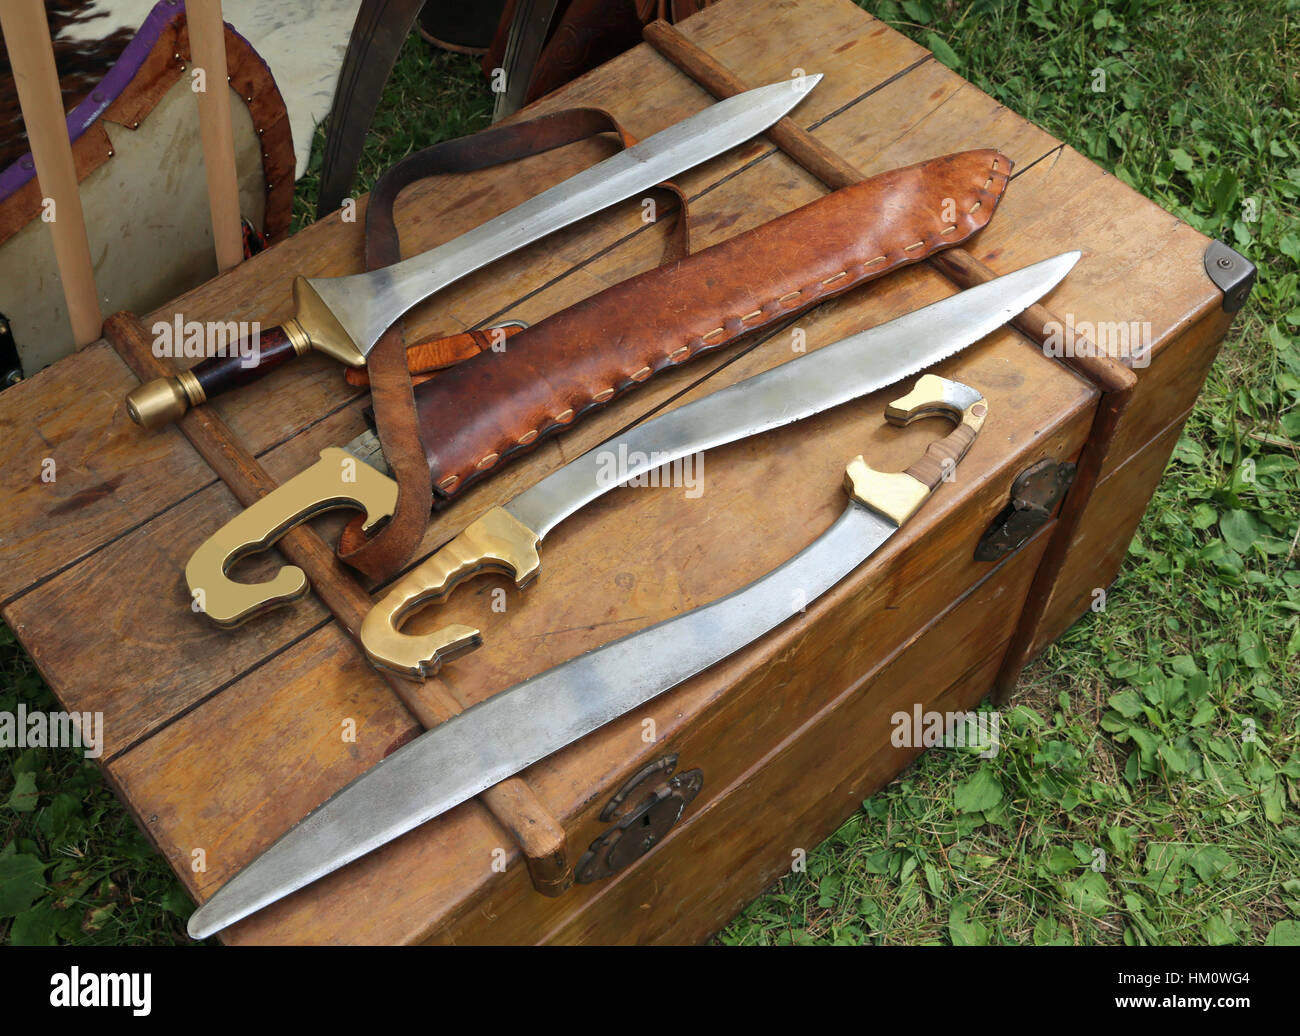 Ancient sharp weapons knives swords medieval or Roman Stock Photo